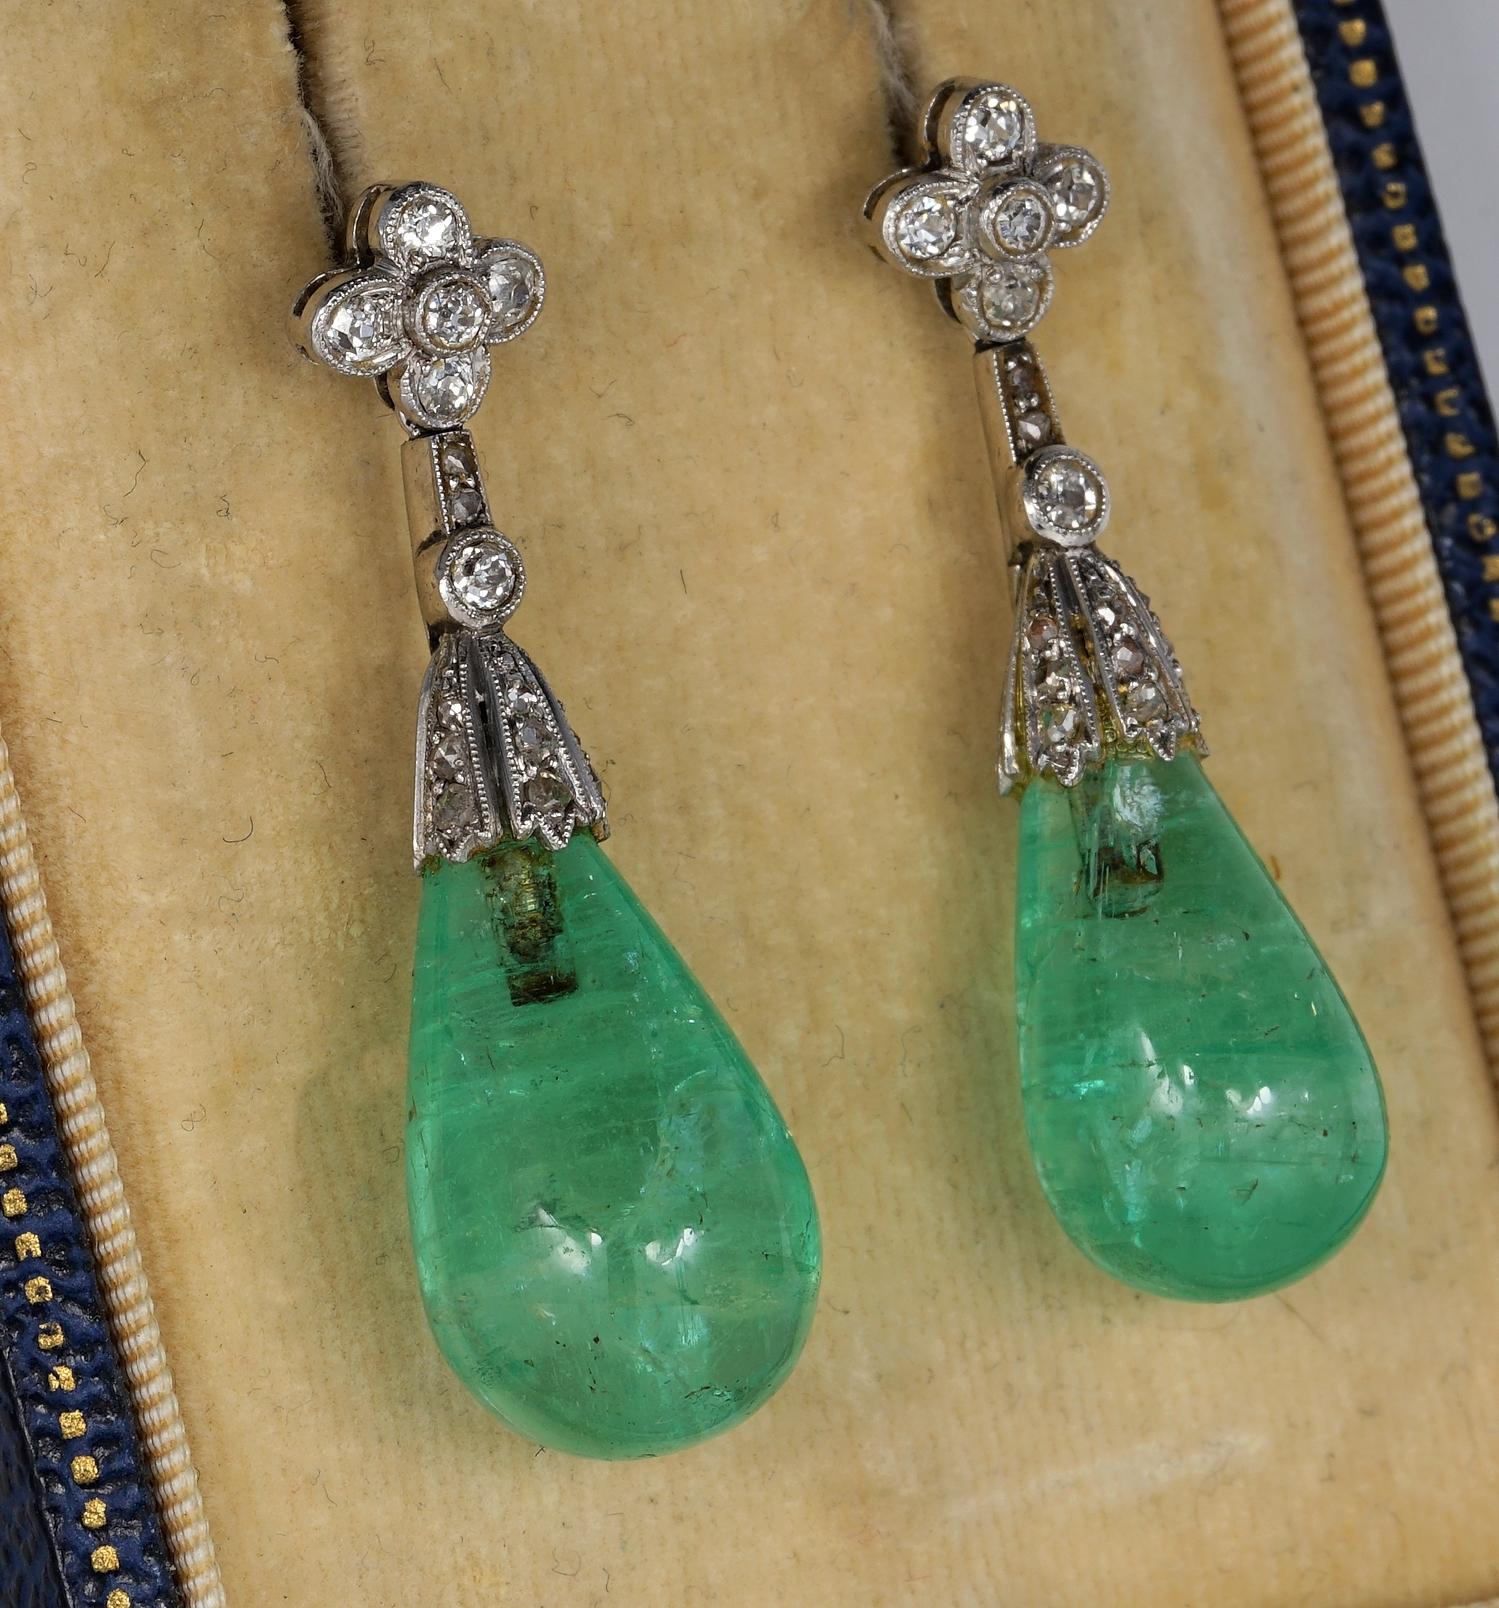 Everlasting Beauties
Authentic Art Deco high end pair of antique earrings
Platinum made, French origin
Sleek elegant design, very easy wear on day or at night
Featuring two large Natural Emerald drops being 35.80 Ct for both (20 mm. x 11 mm.)